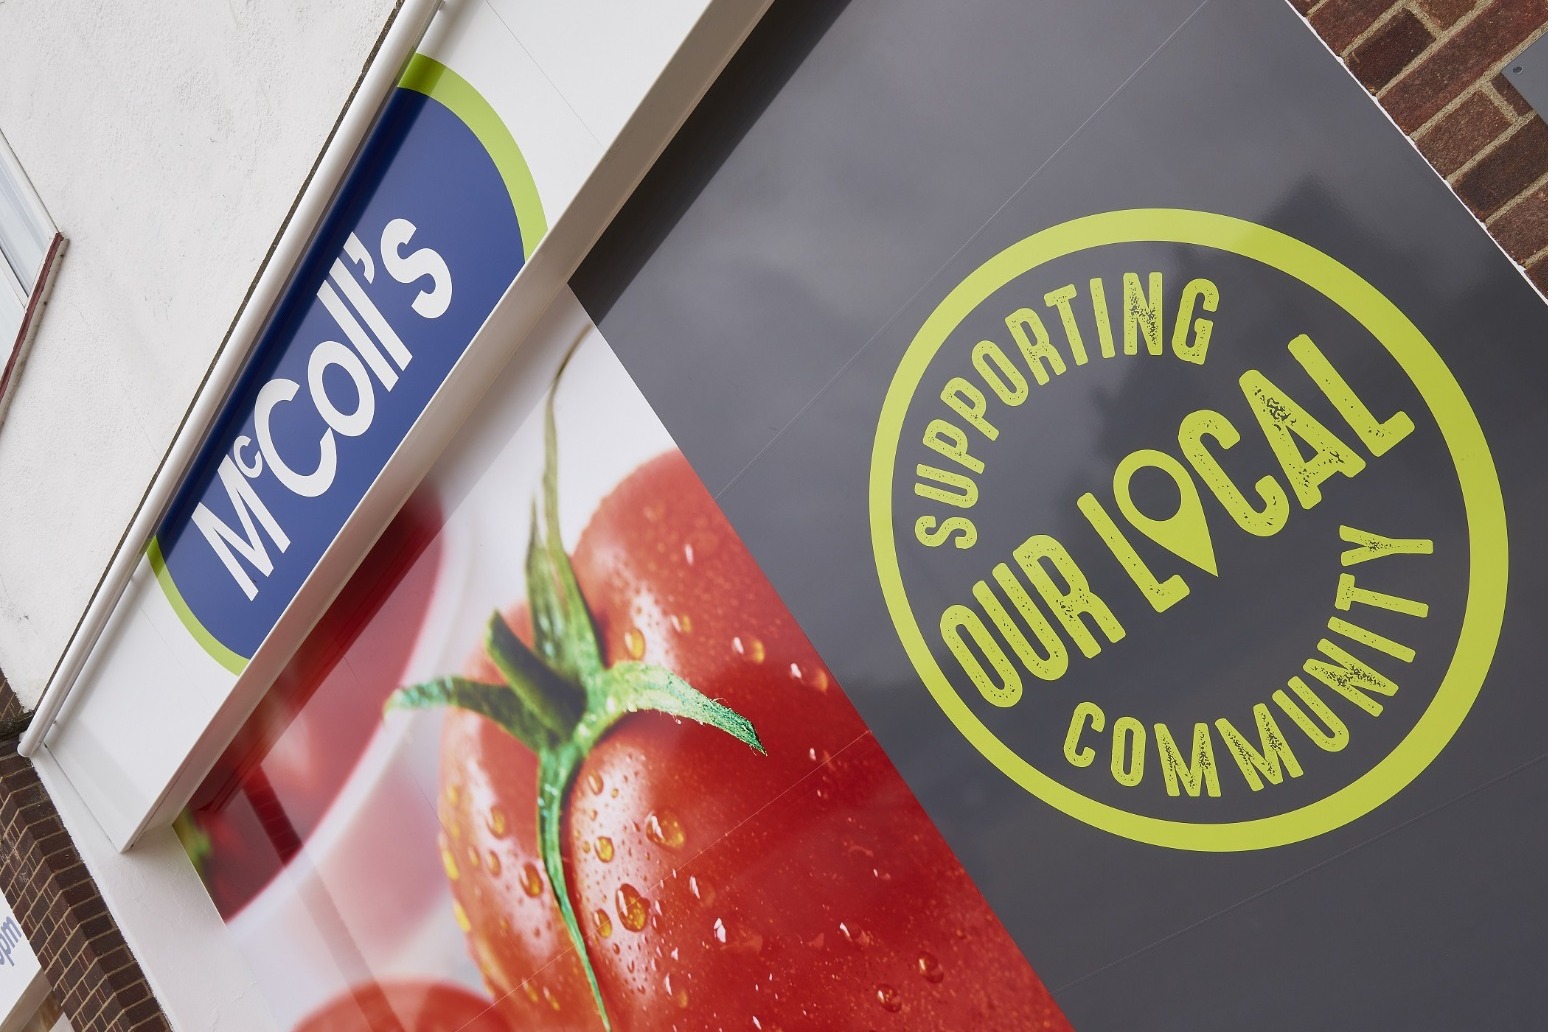 Morrisons tipped to beat EG in race to buy McColl’s 